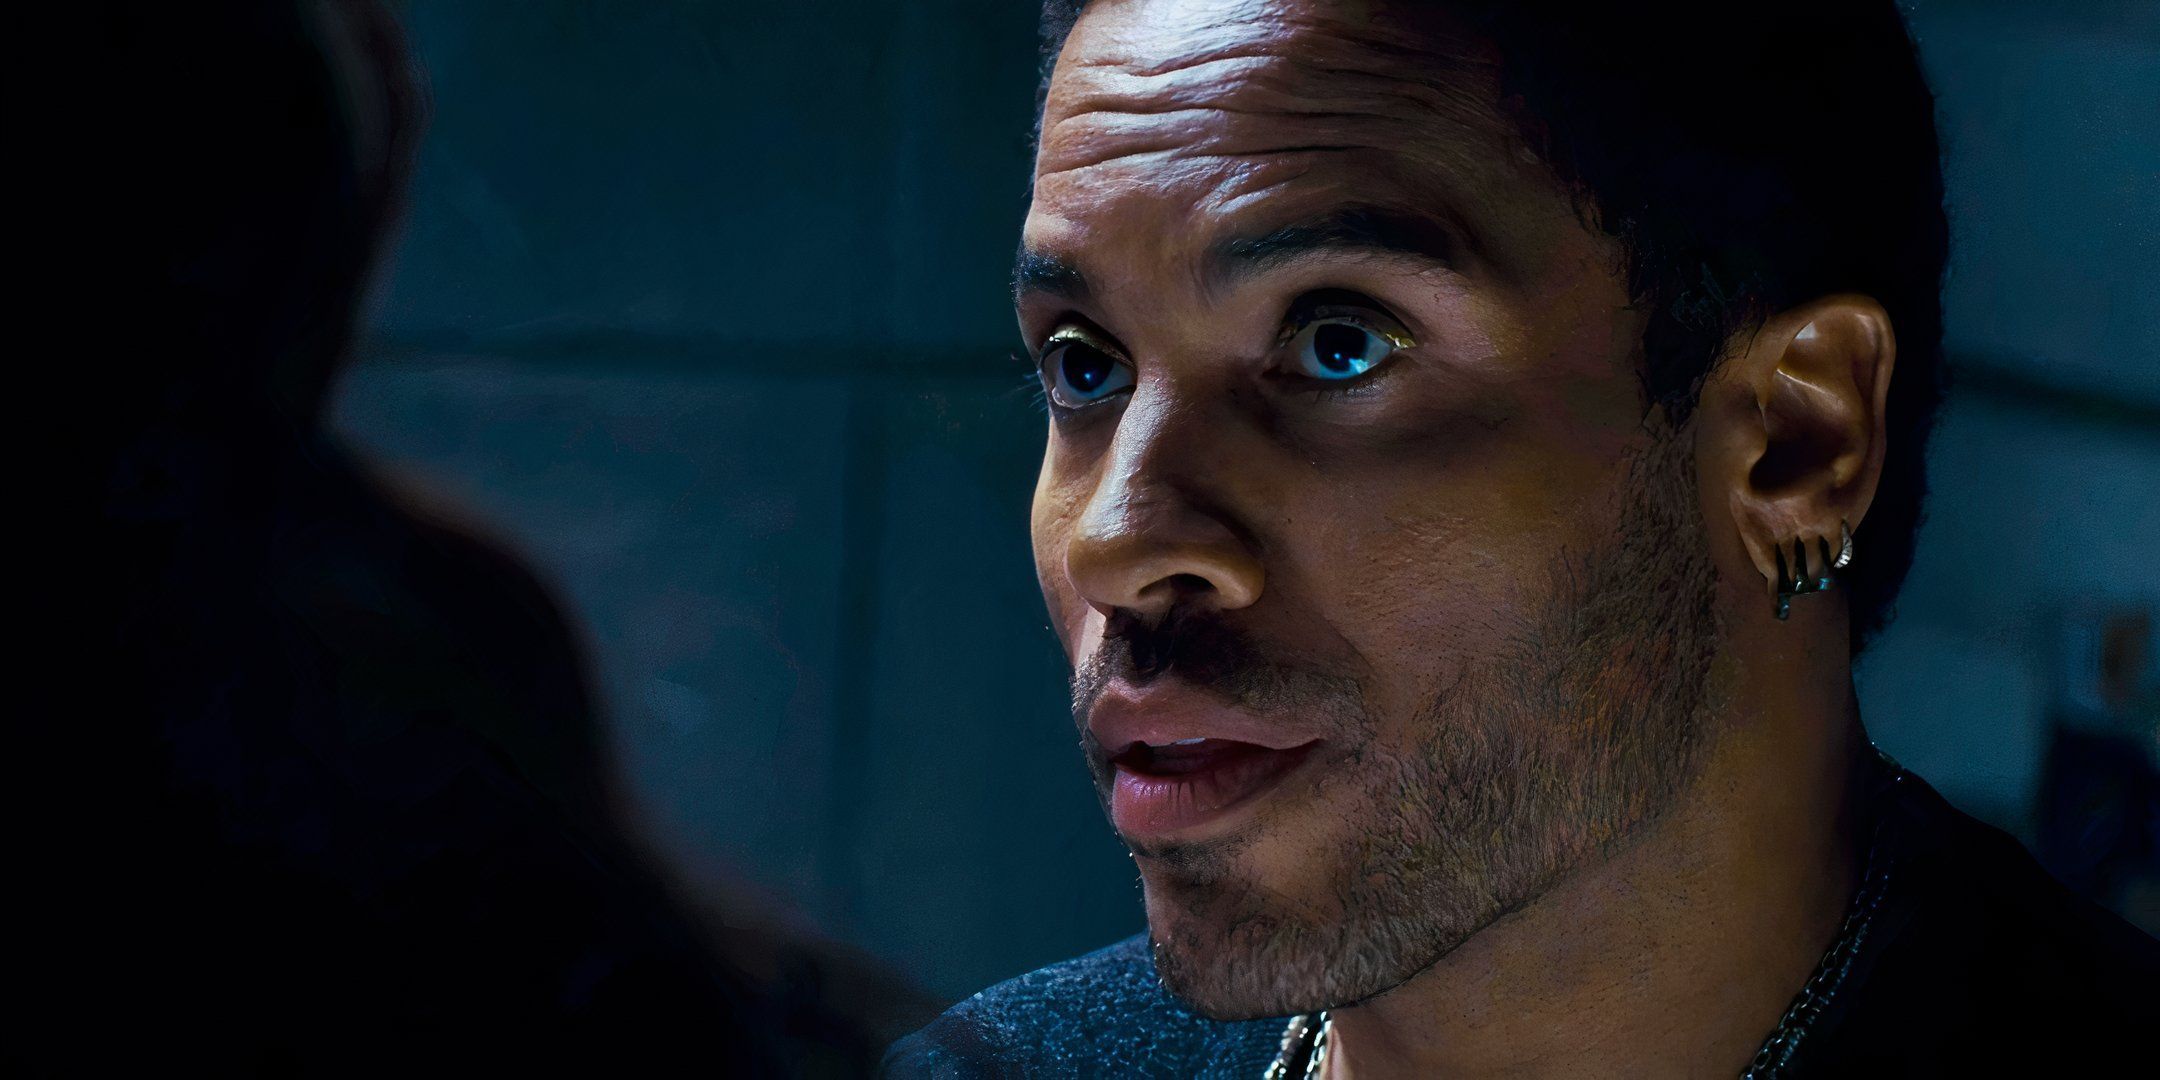 Lenny Kravitz as Cinna in 'The Hunger Games'